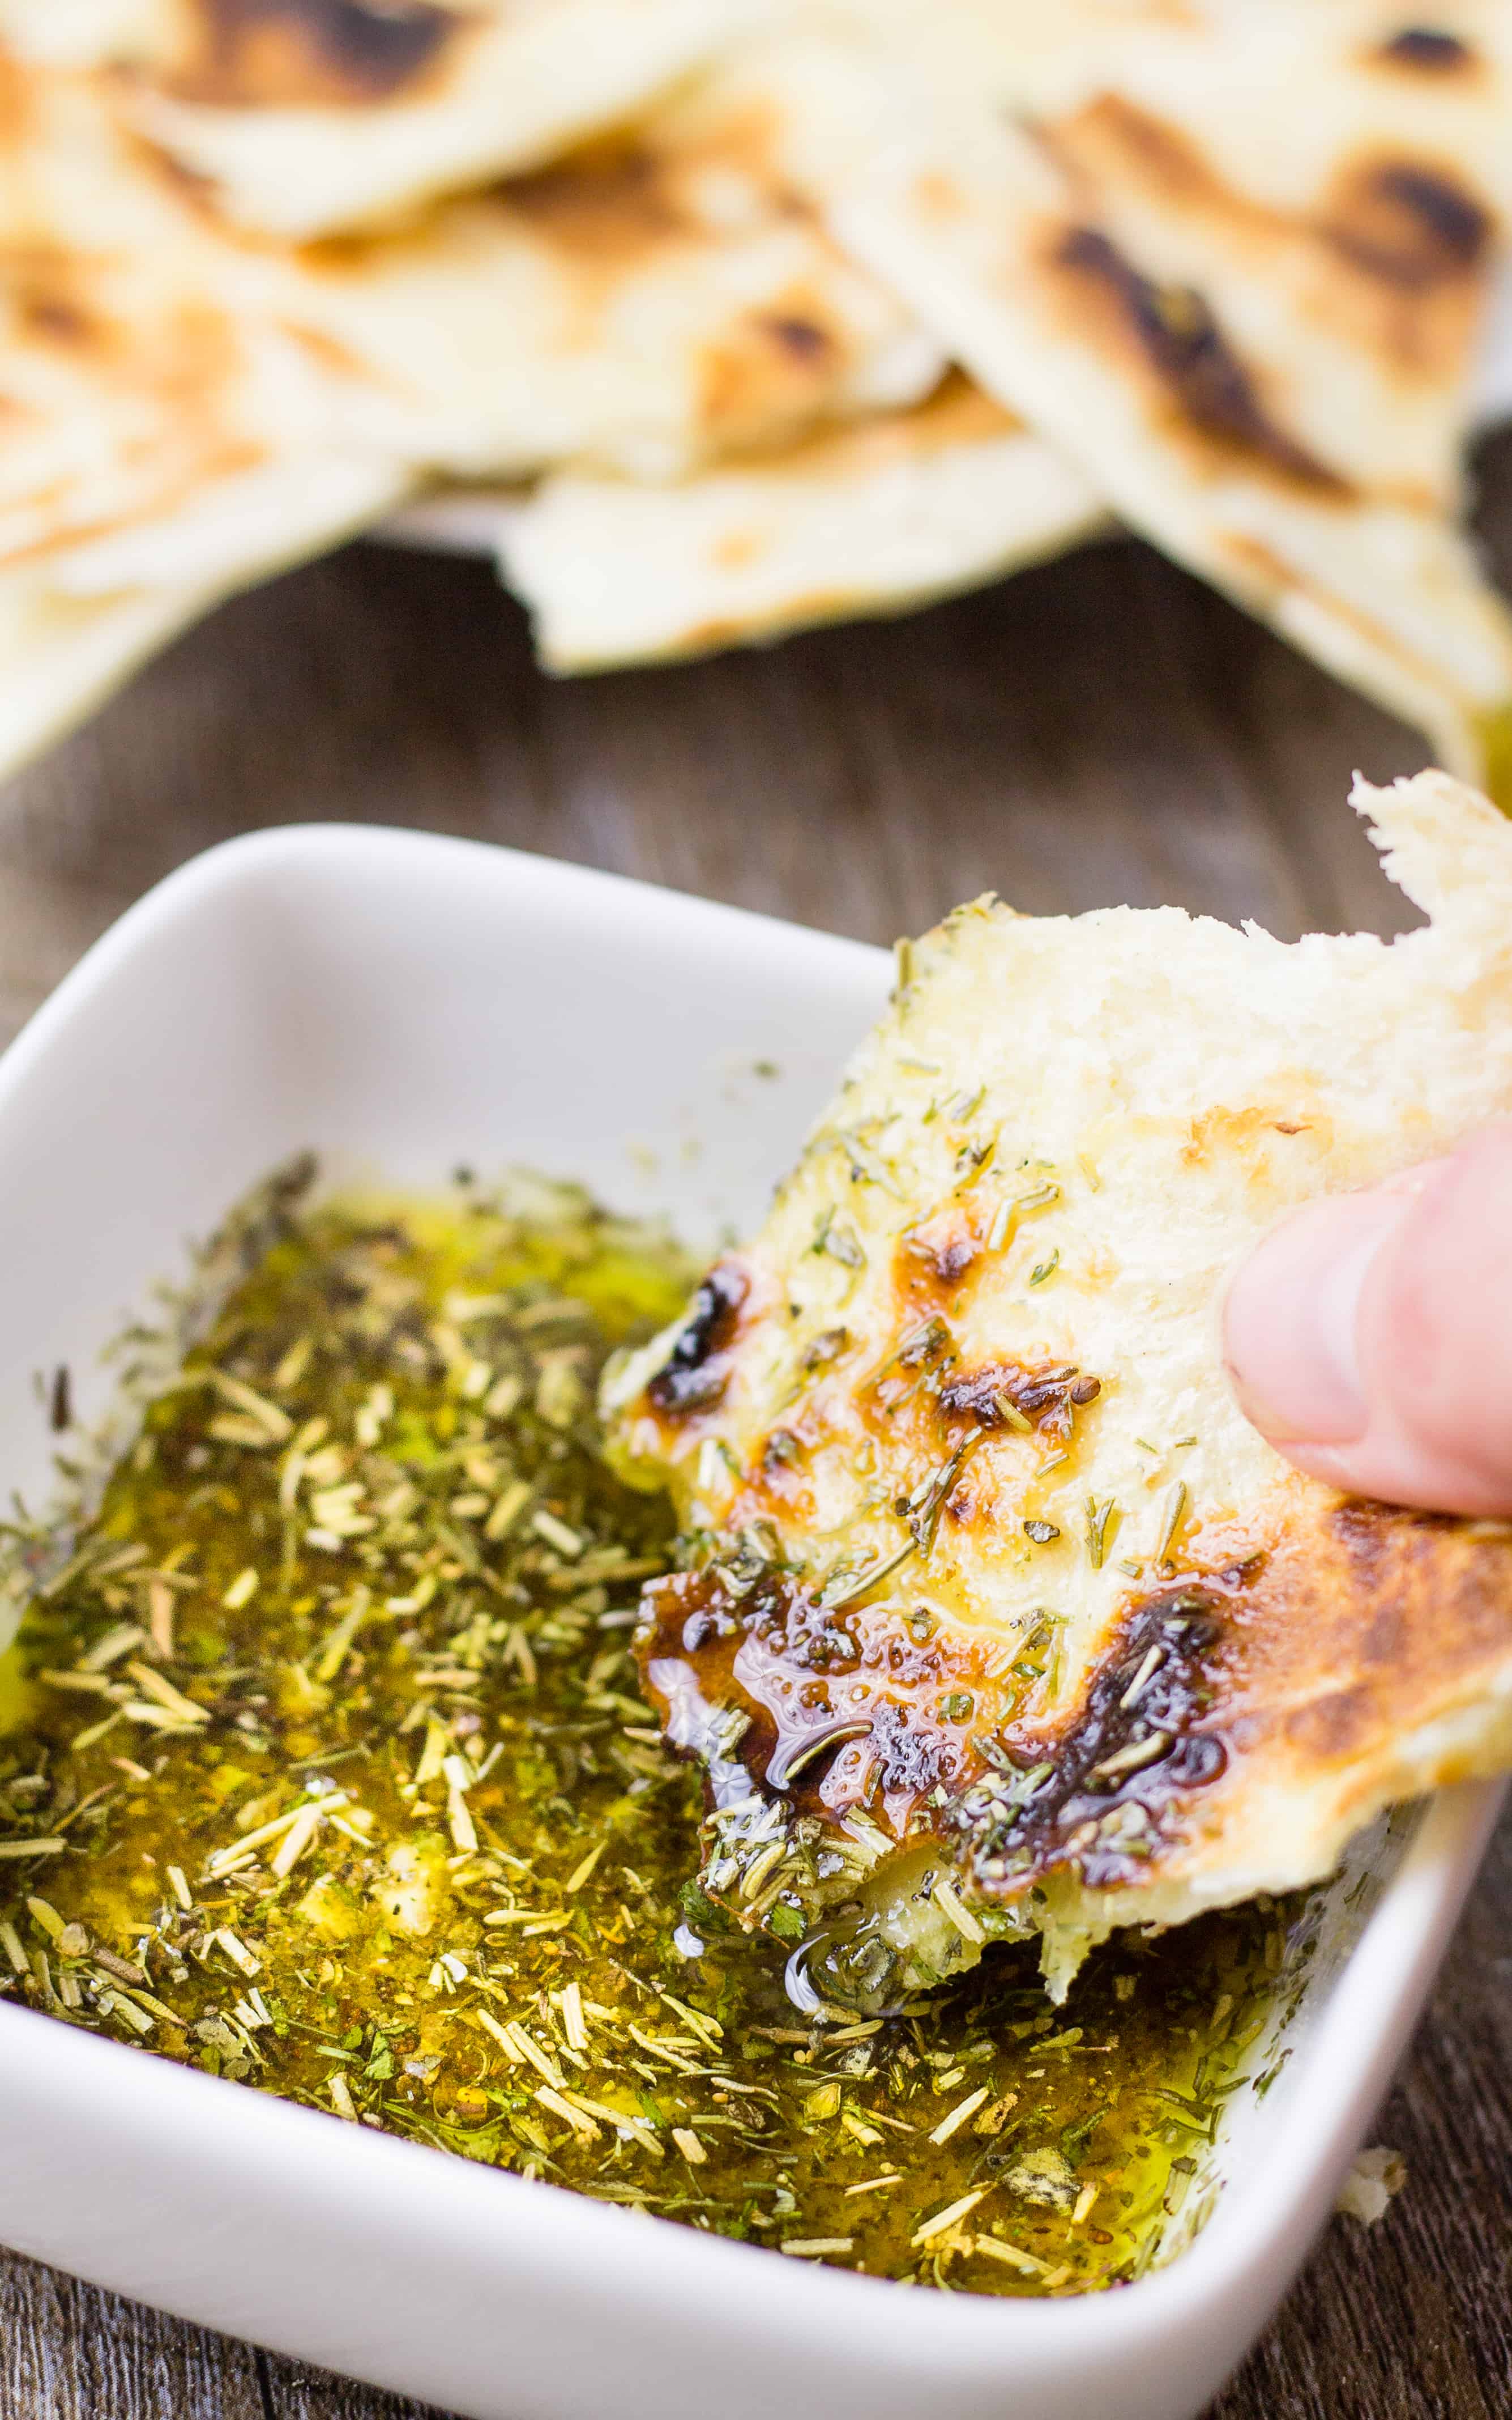 Greek Dipping Oil is light and flavorful. Perfect for an easy bread dipping recipe! | Take Two Tapas | #GreekRecipes #GreekSeasoning #Bread #DippingOil #EasyDippingOil